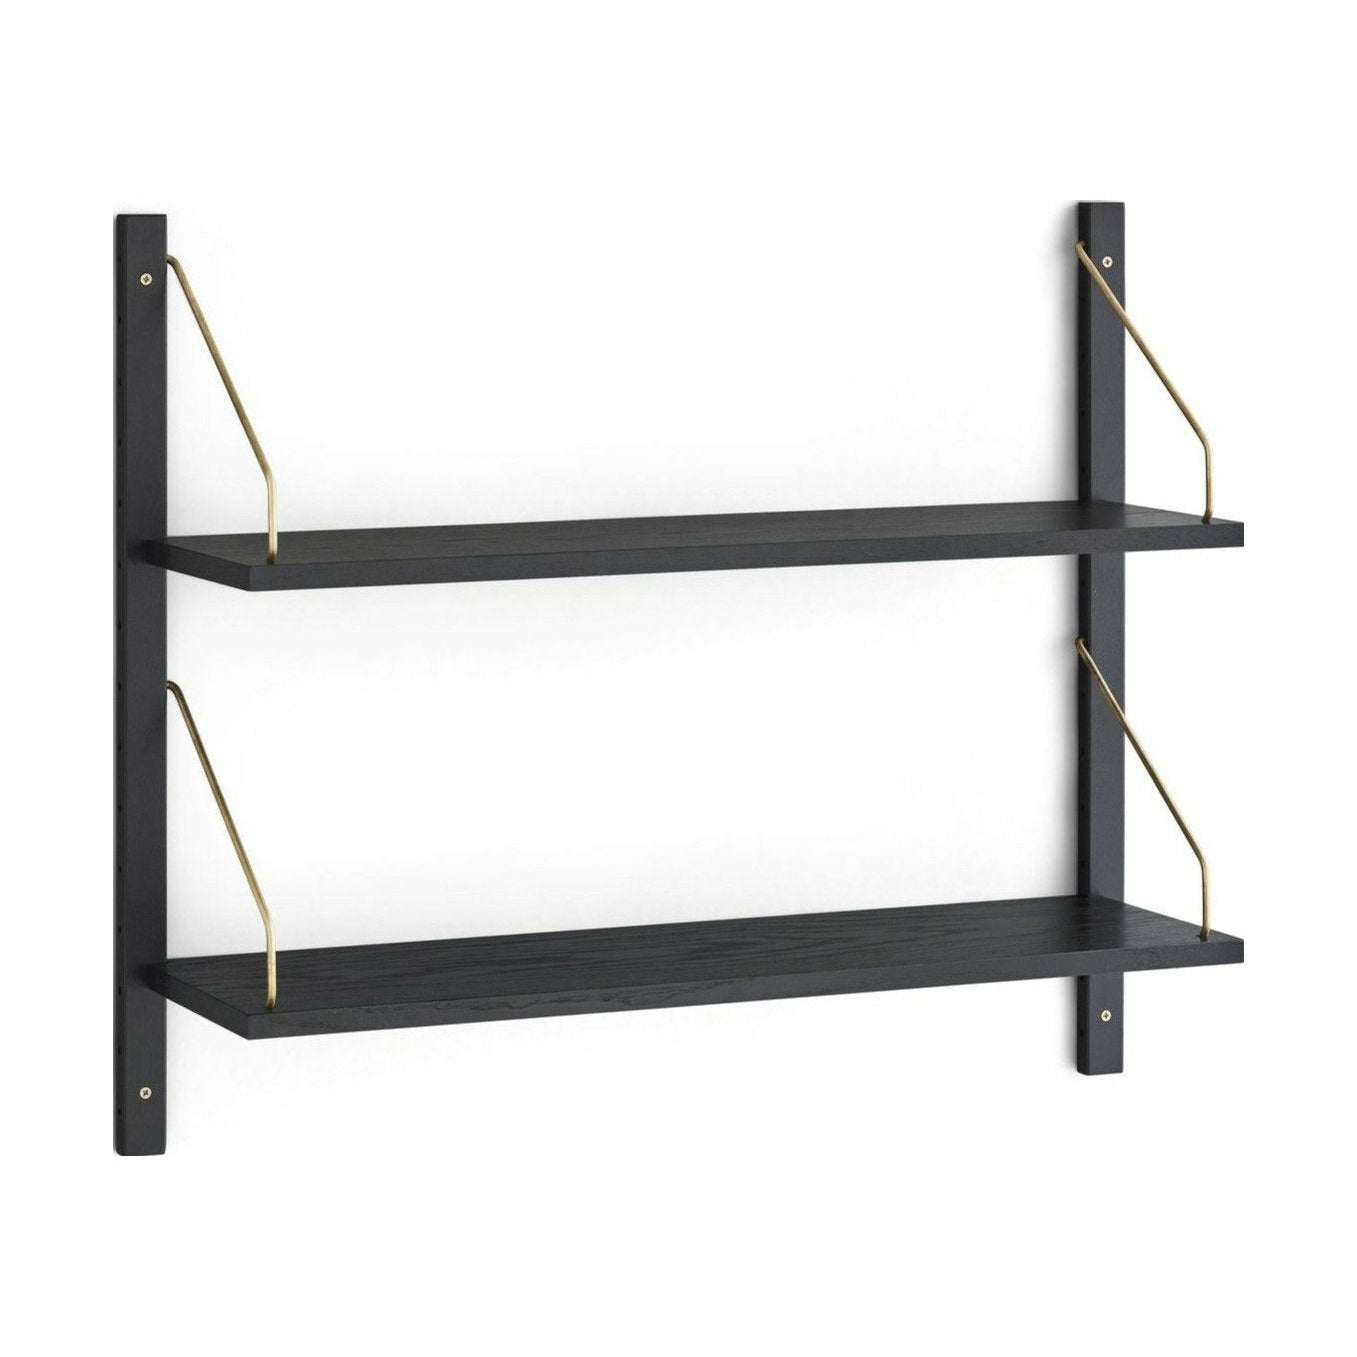 DK3 Royal System Stag Oak Black Lacqueed/Brass, 24x83x74 cm